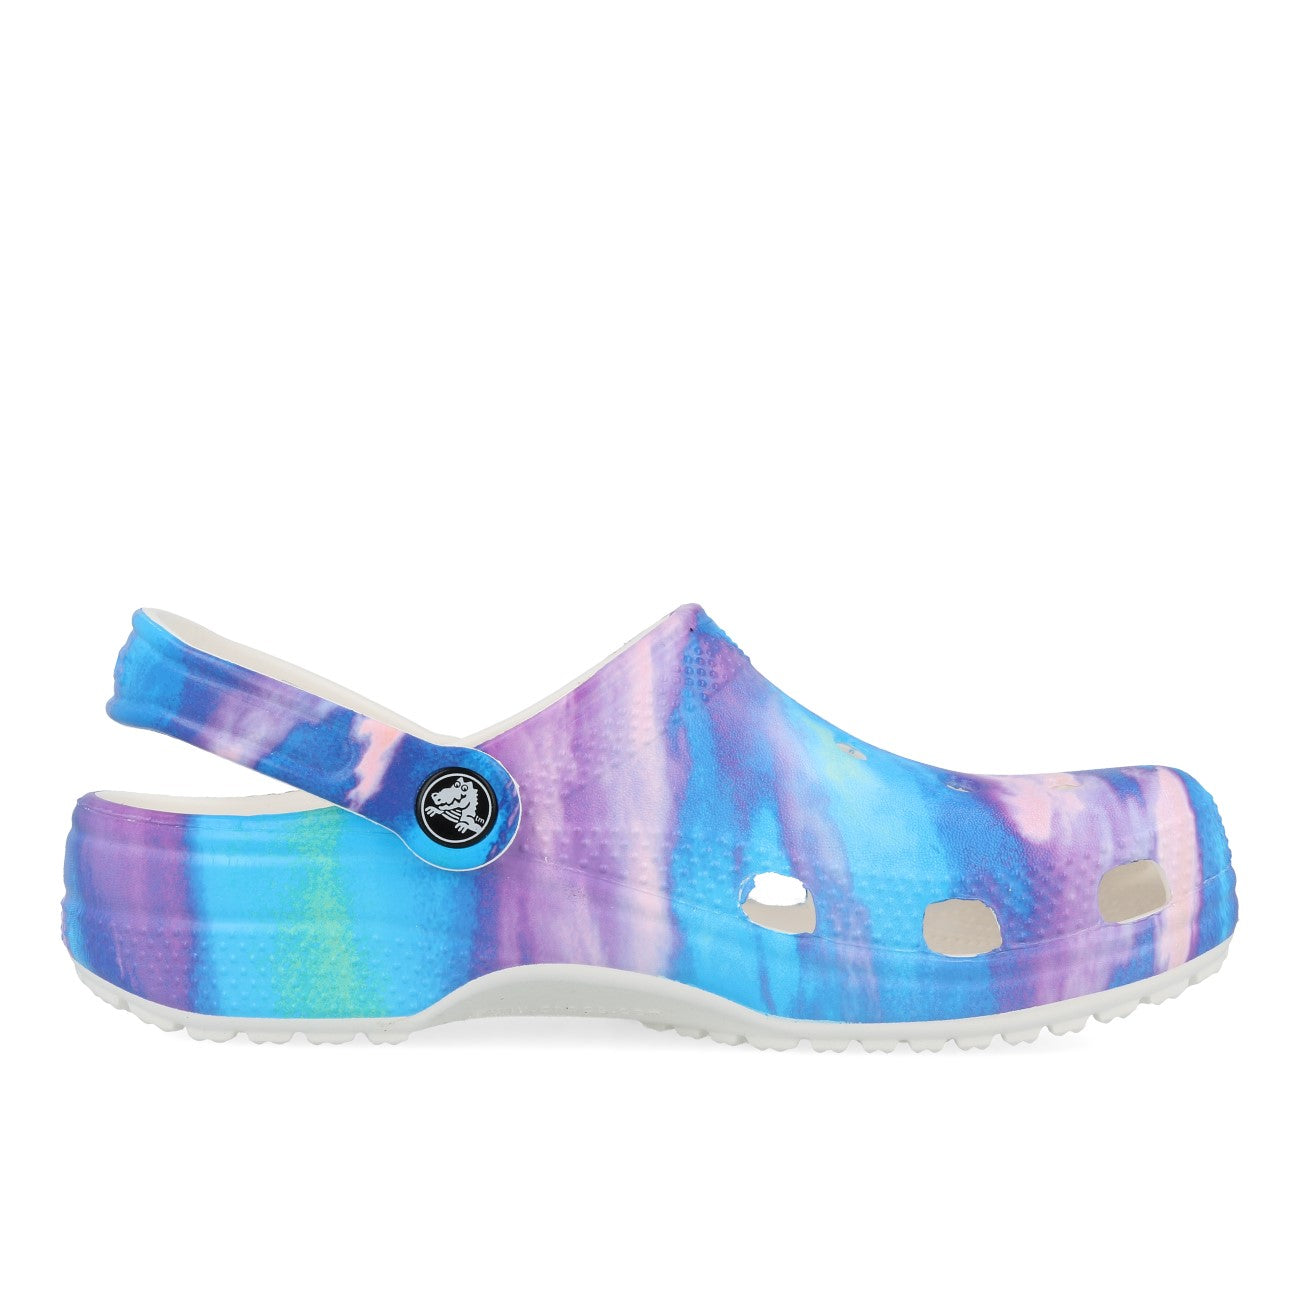 Crocs Classic Out of this World II Clog Multi